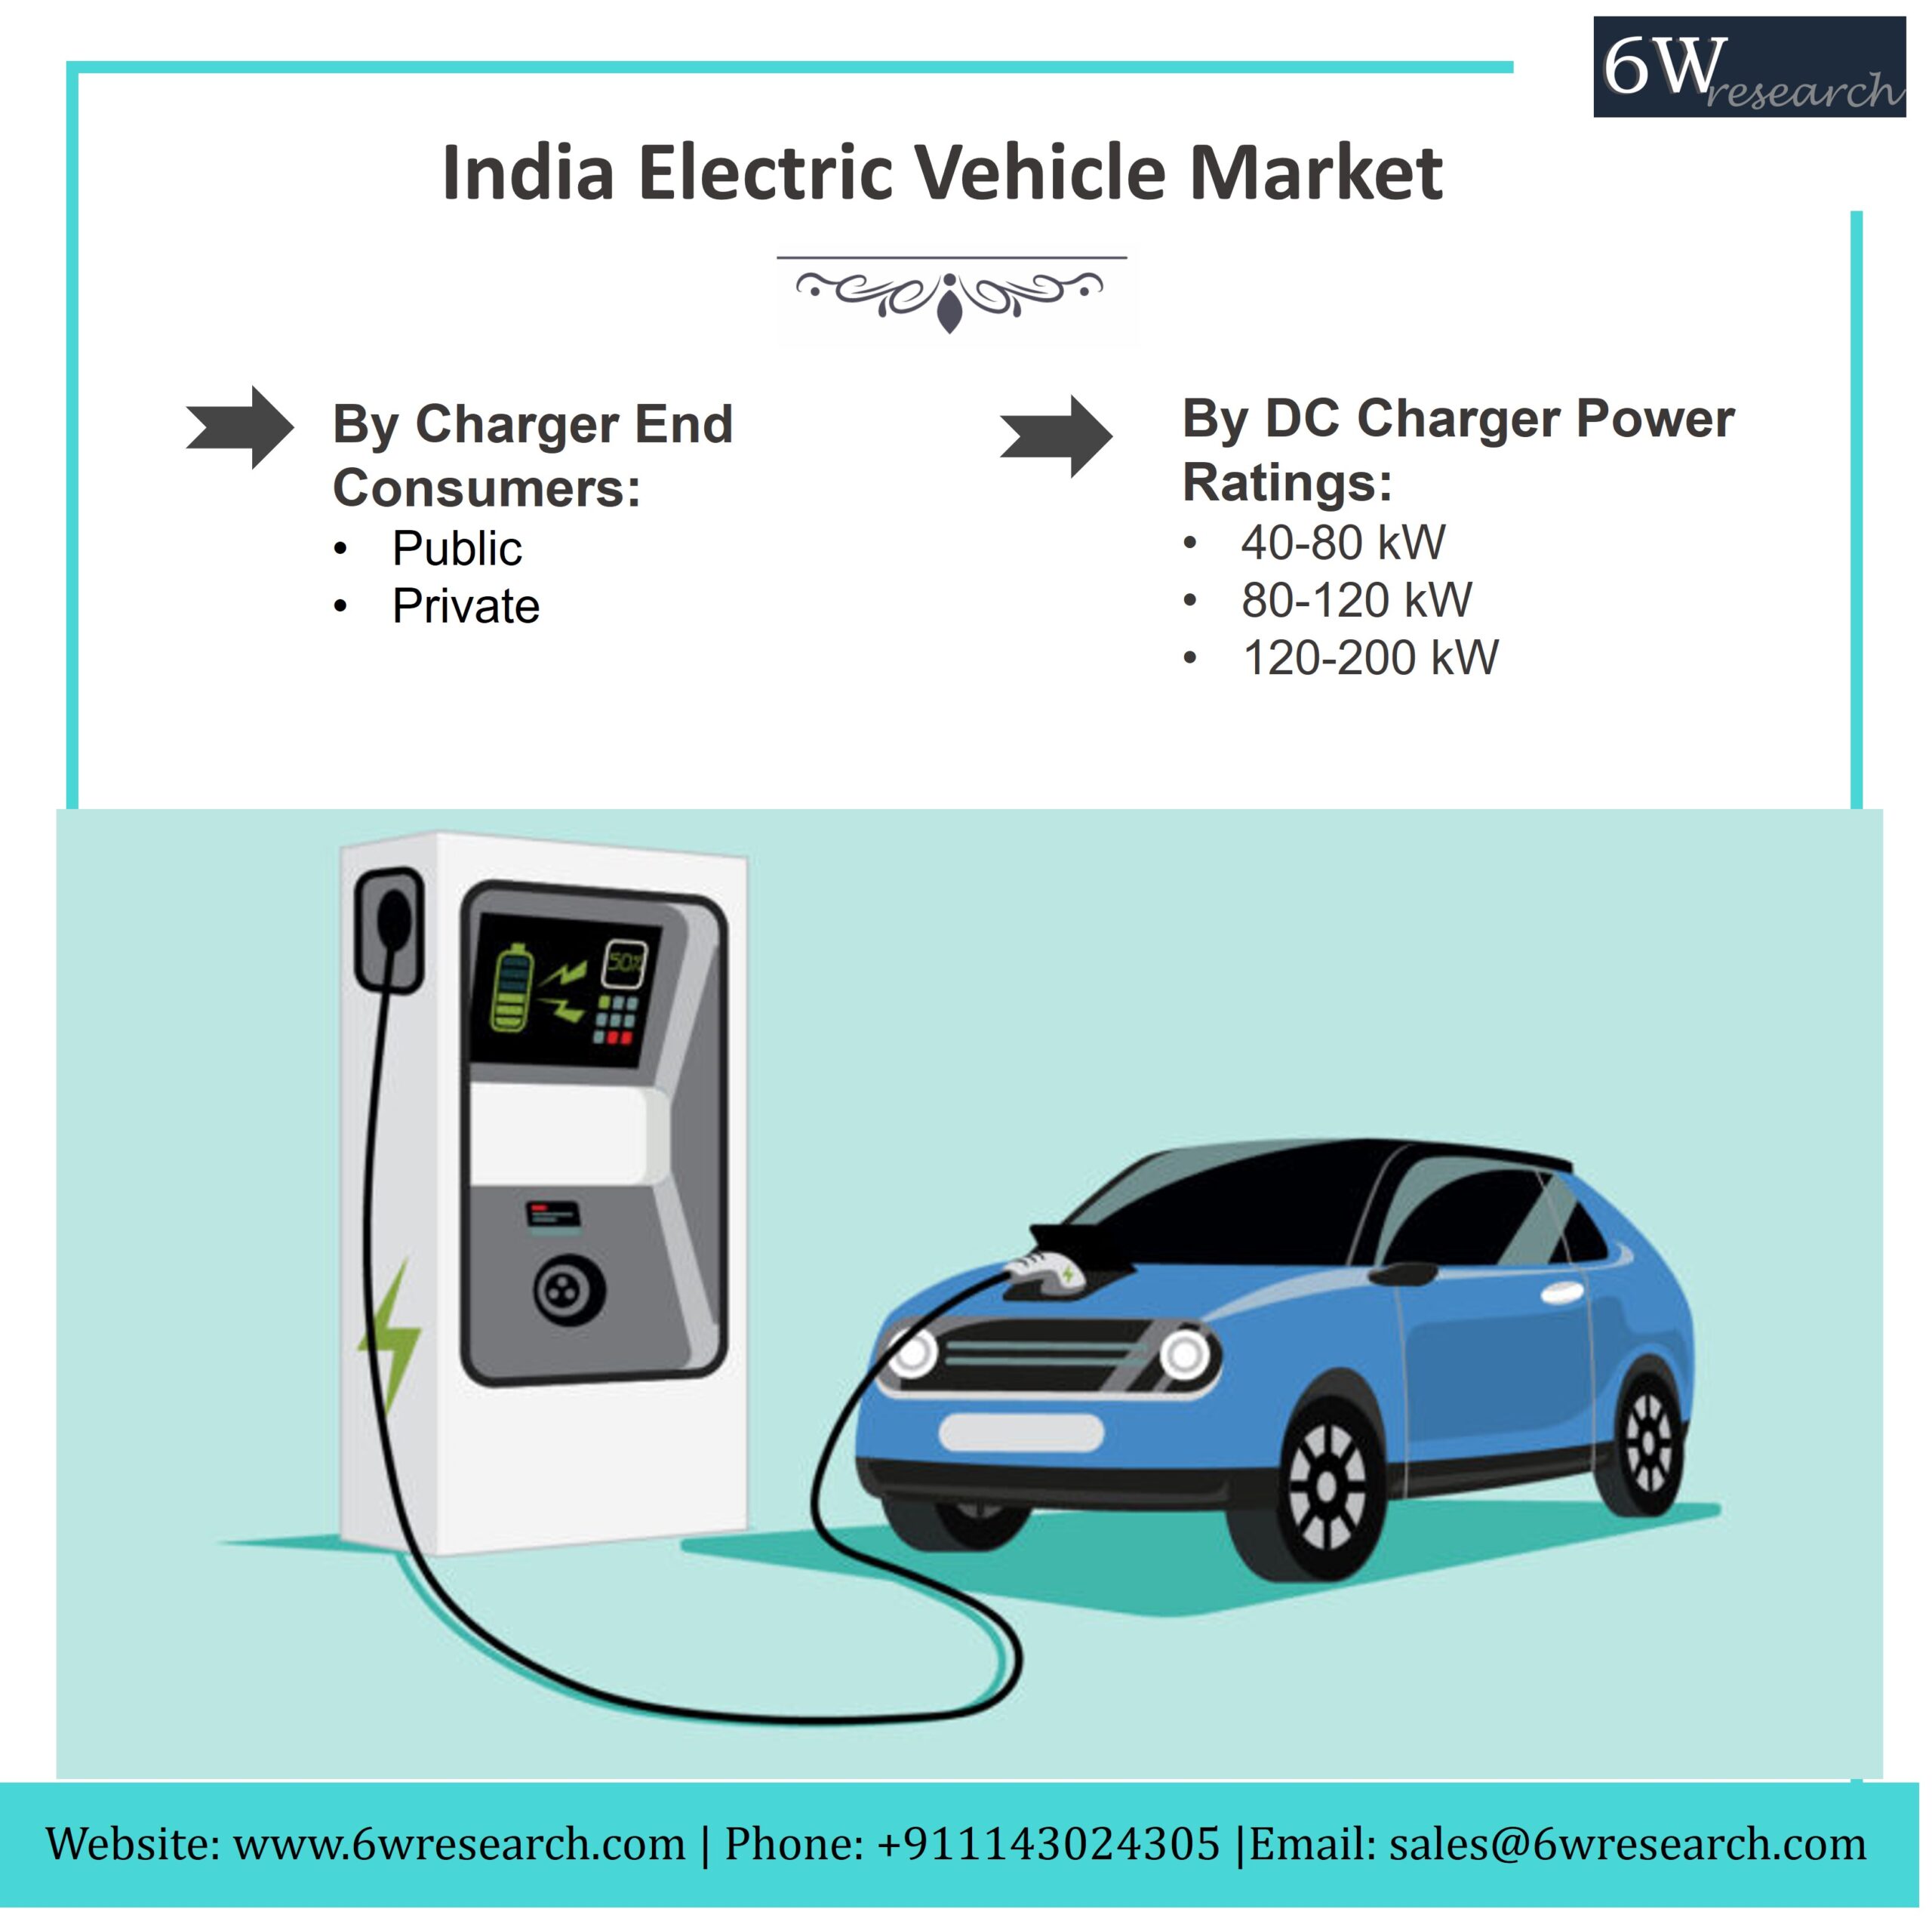 India Electric Vehicle Market (2020-2025) | Growth, Drivers & Challenges – 6Wresearch